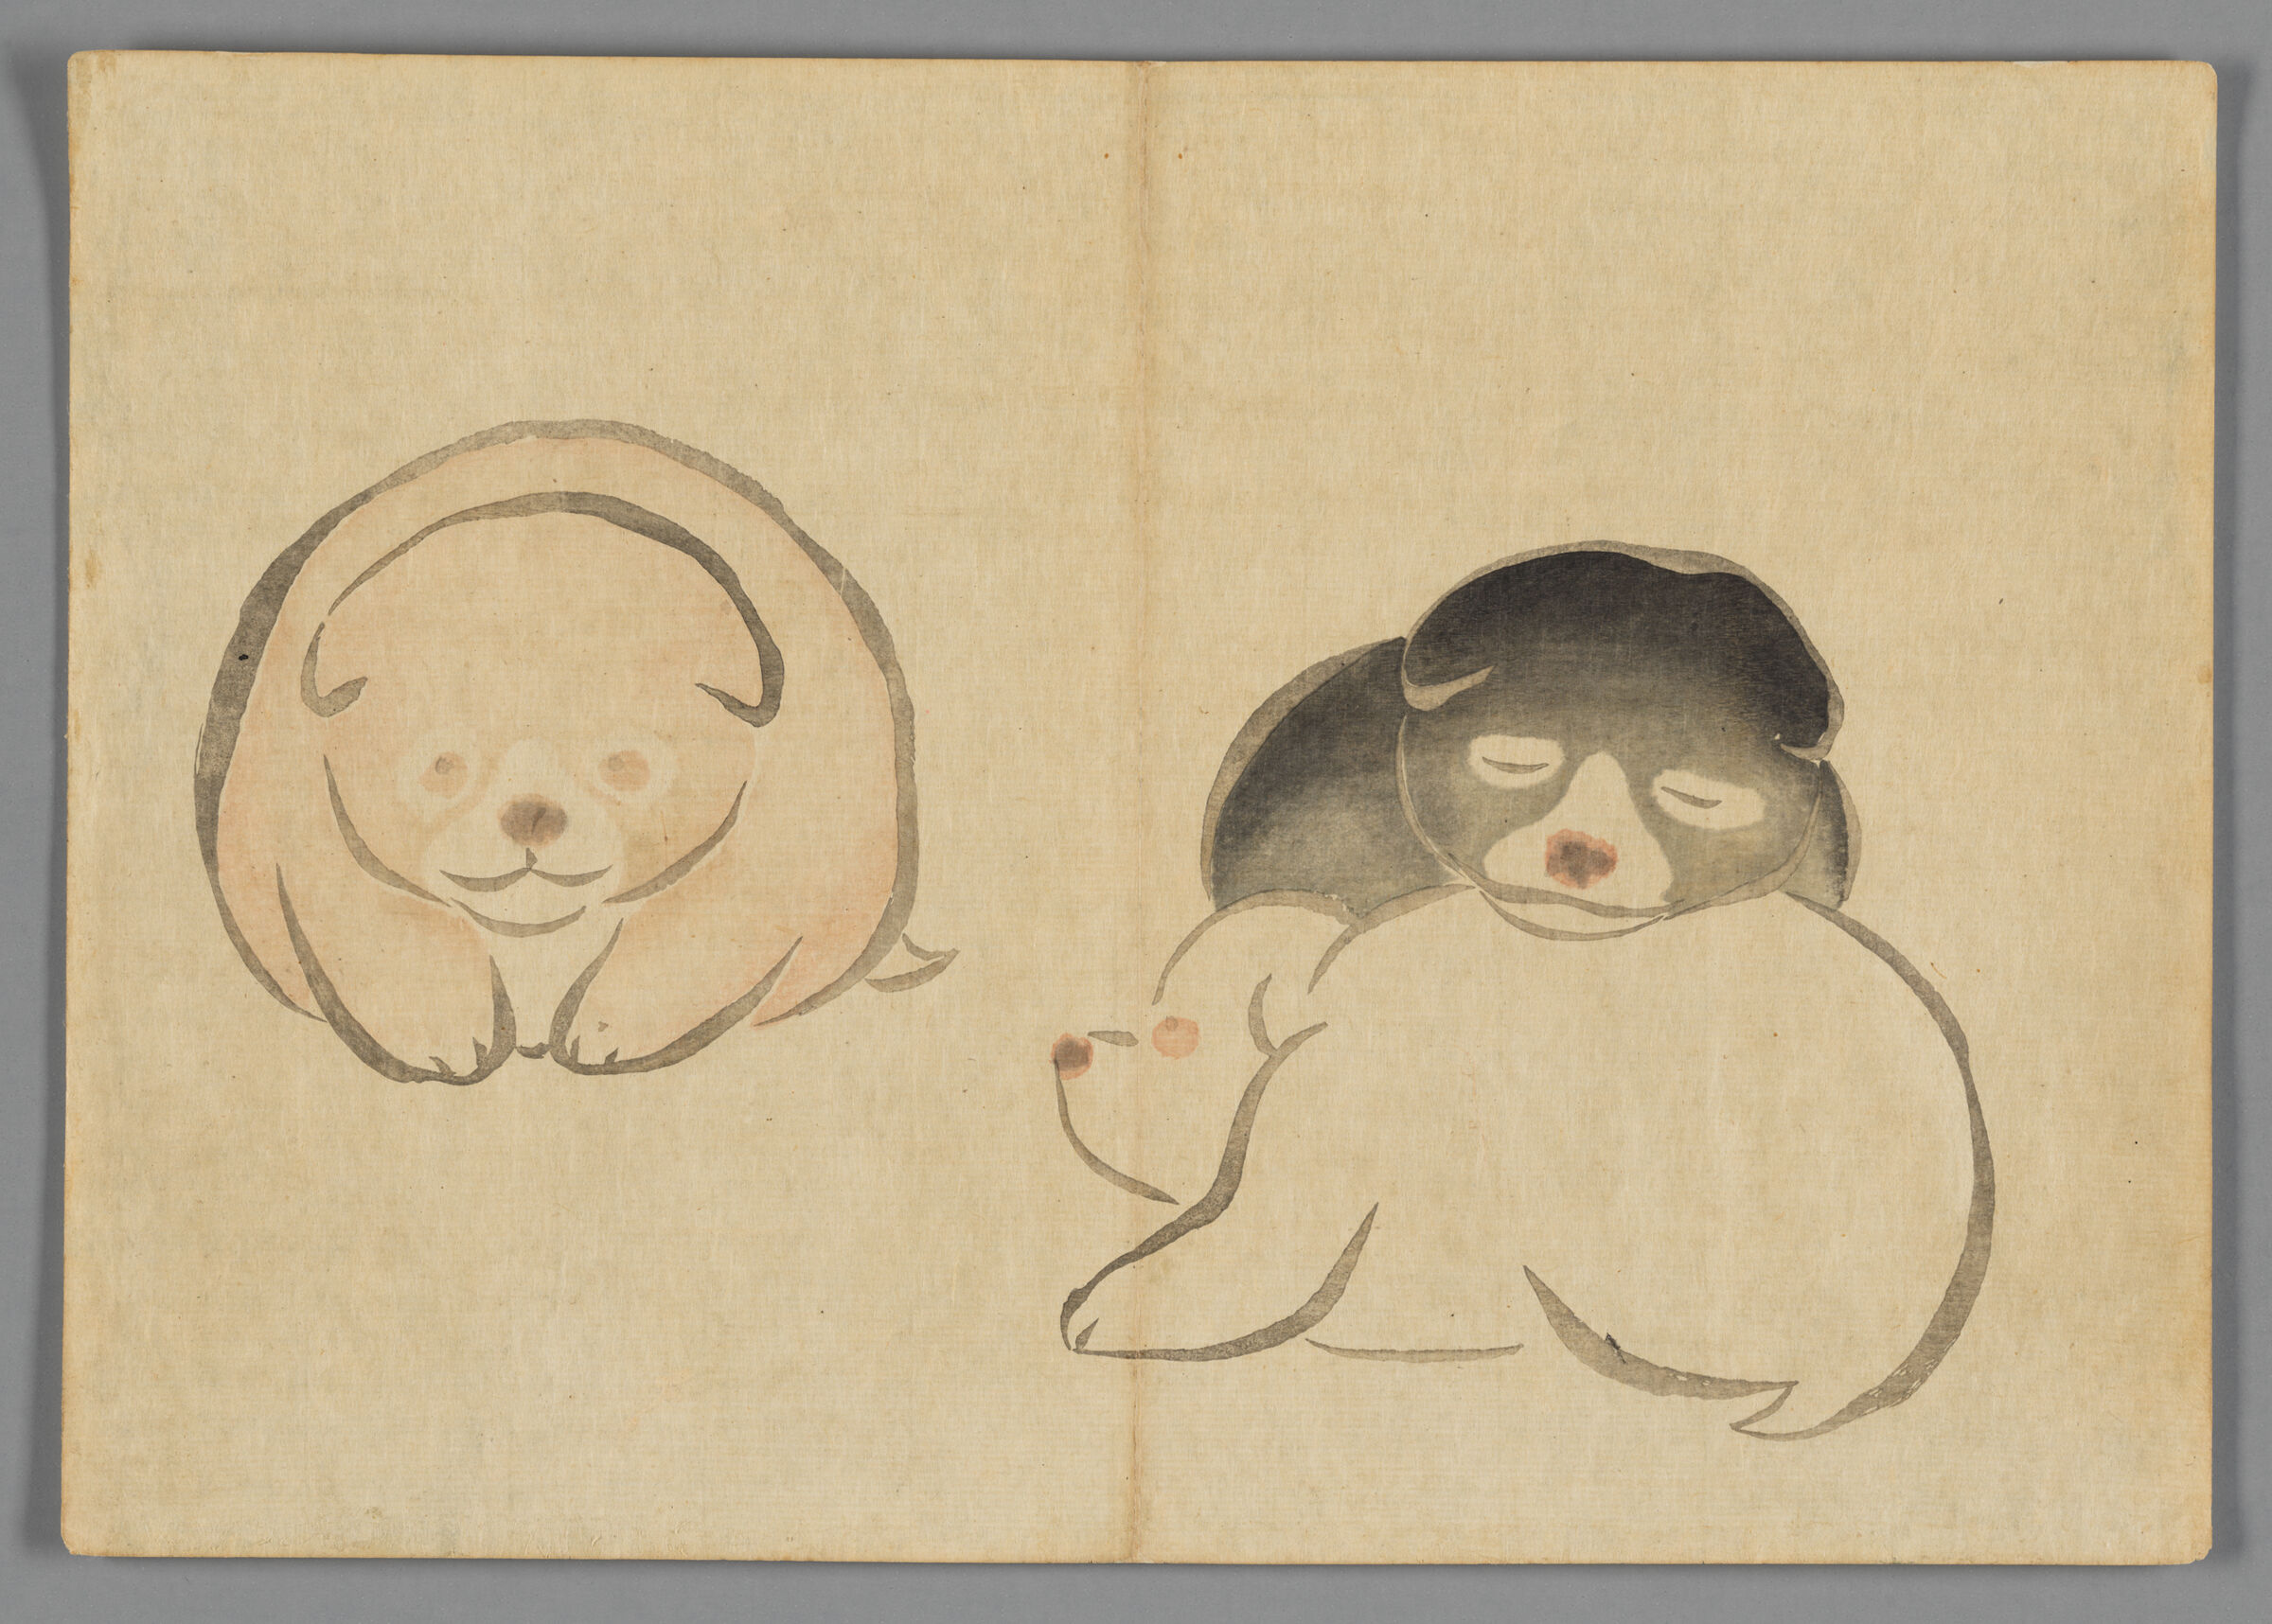 Three Puppies, From The Kōrin Gafu (Kōrin Picture Album)